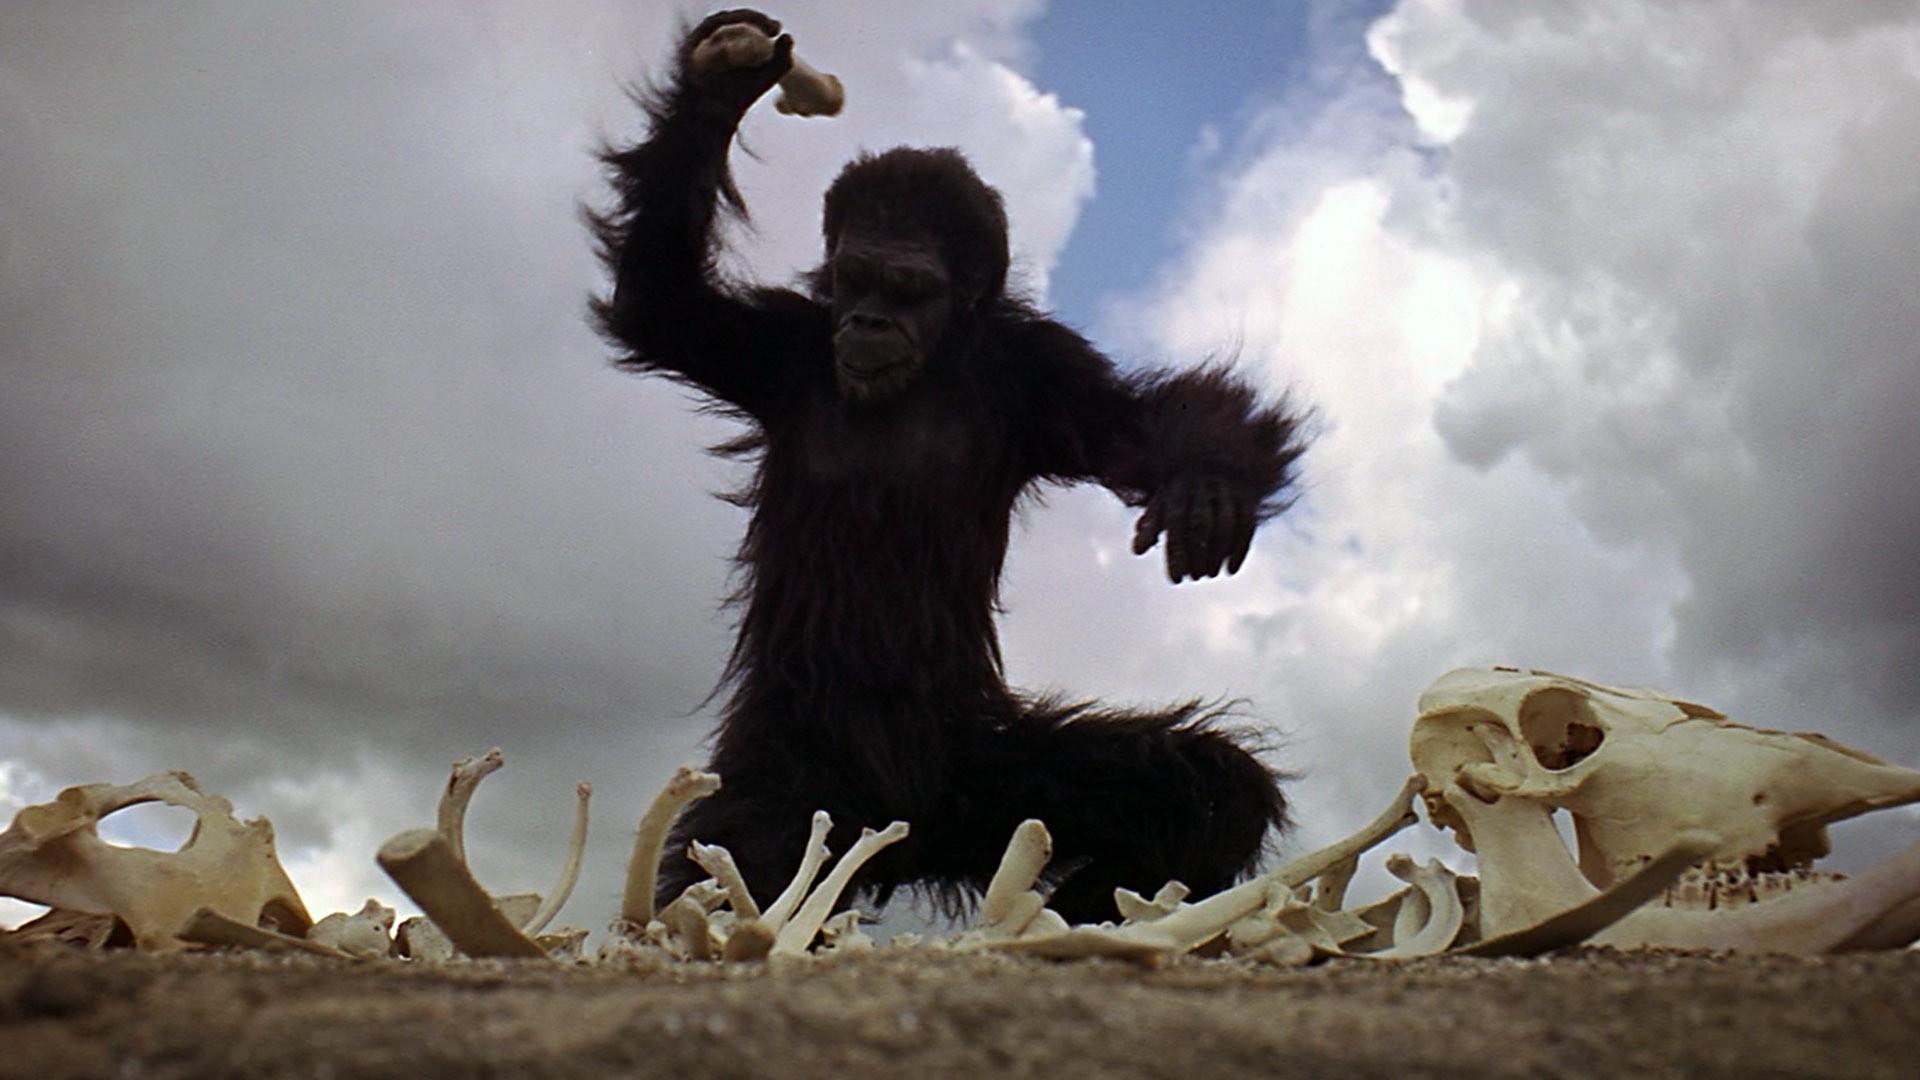 2001 Space Odyssey Apes - 2001 A Space Odyssey Hominids , HD Wallpaper & Backgrounds